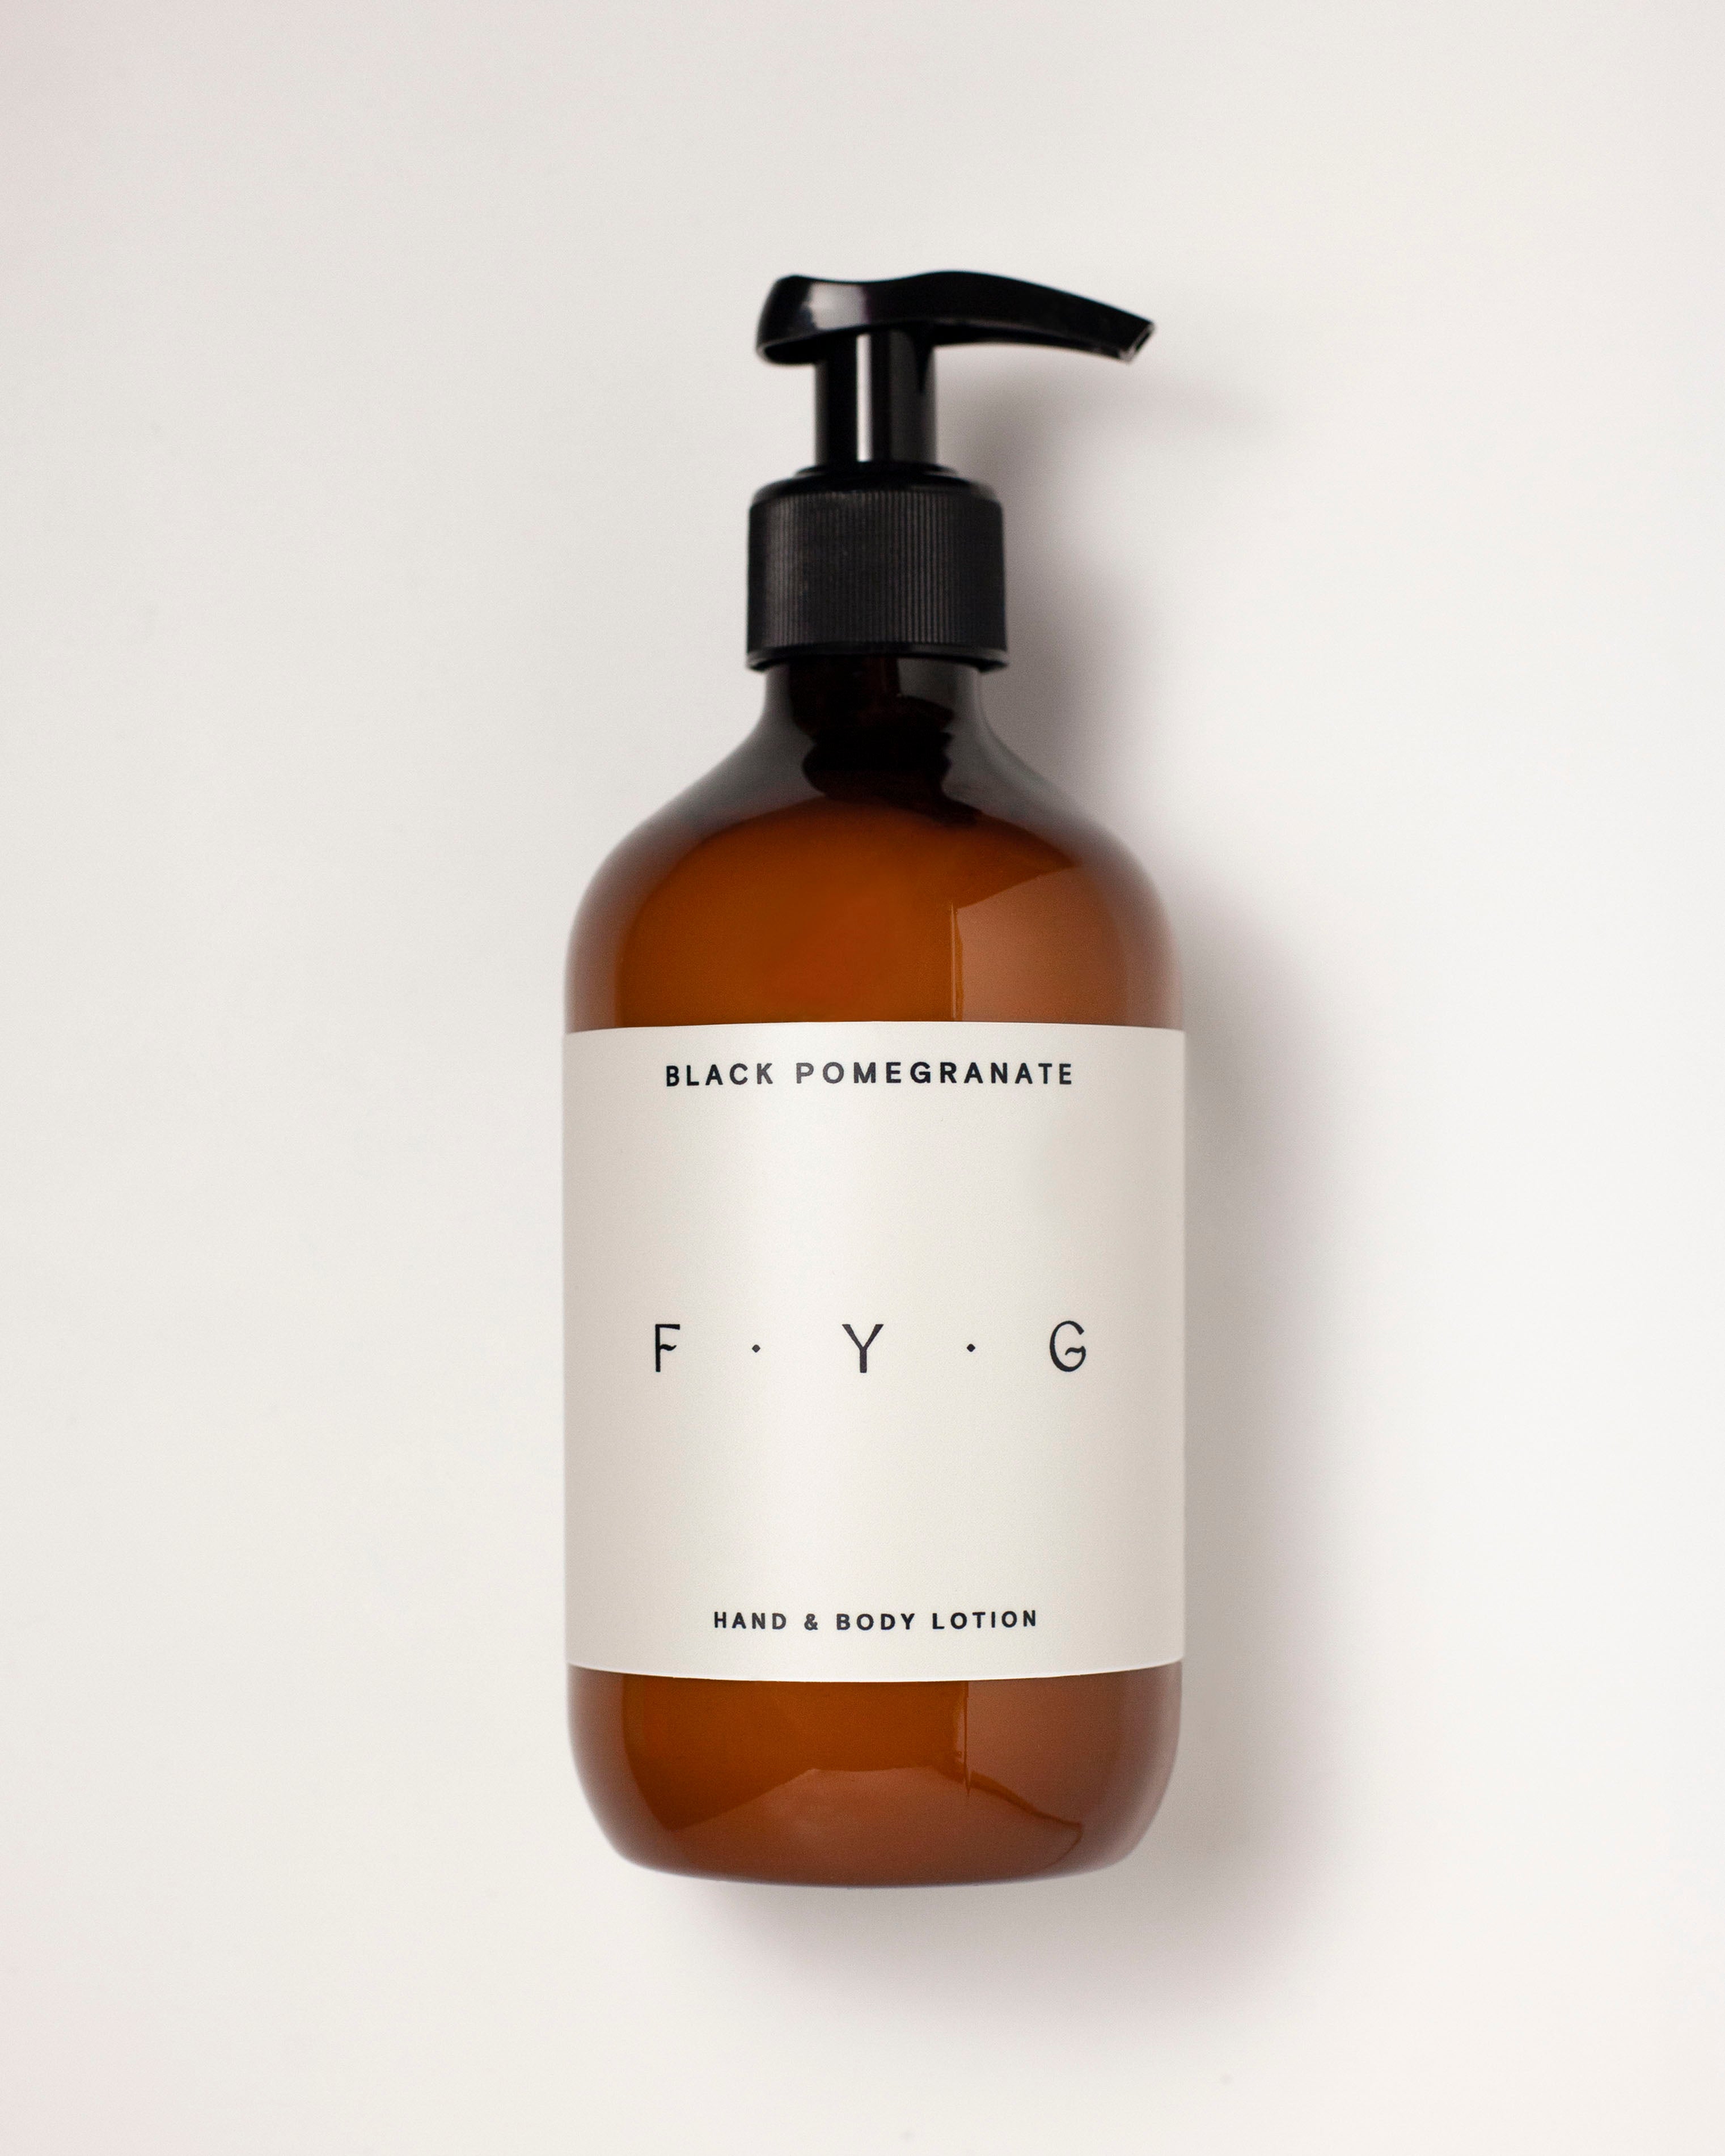 Find Your Glow Black Pomegranate Hand & Body Lotion